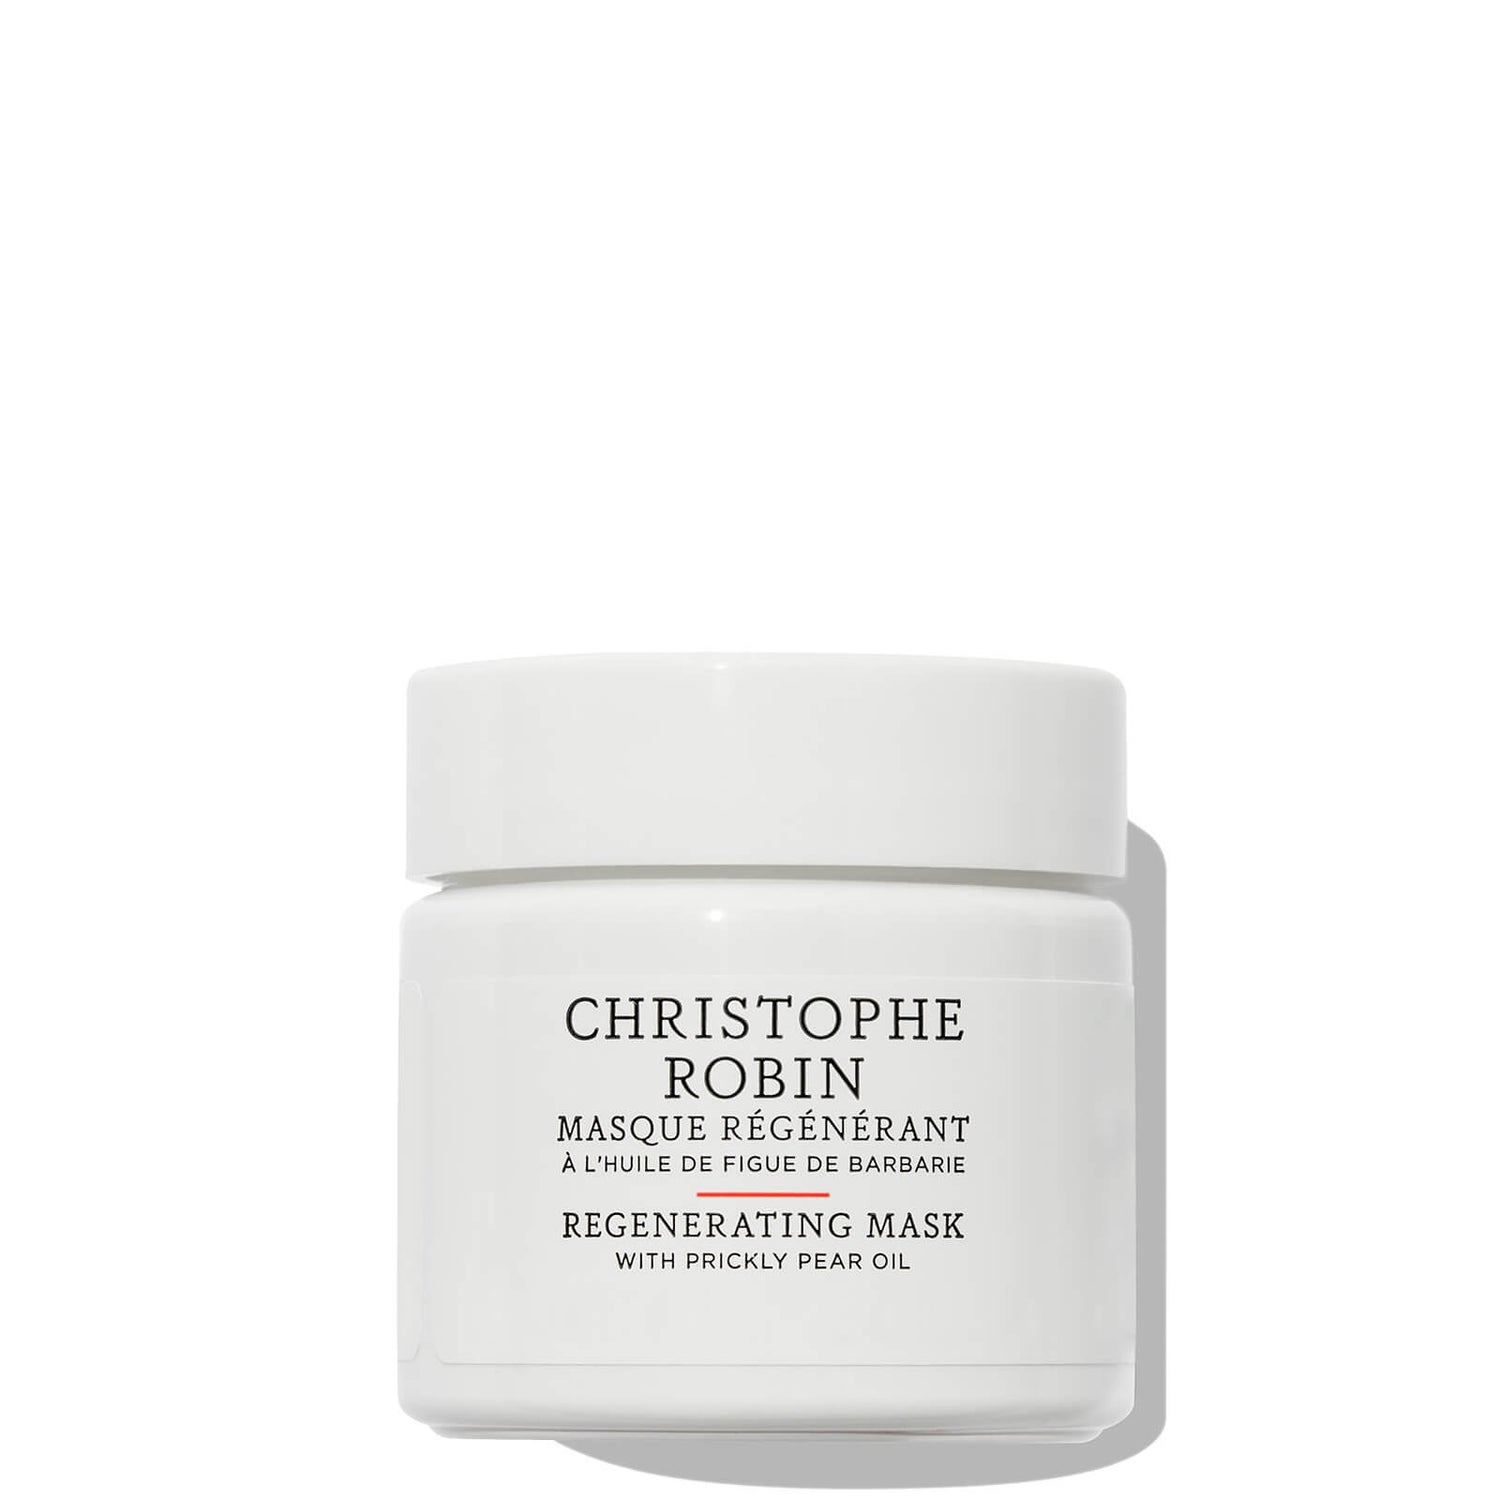 Christophe Robin New Regenerating Mask with Prickly Pear Oil 40ml